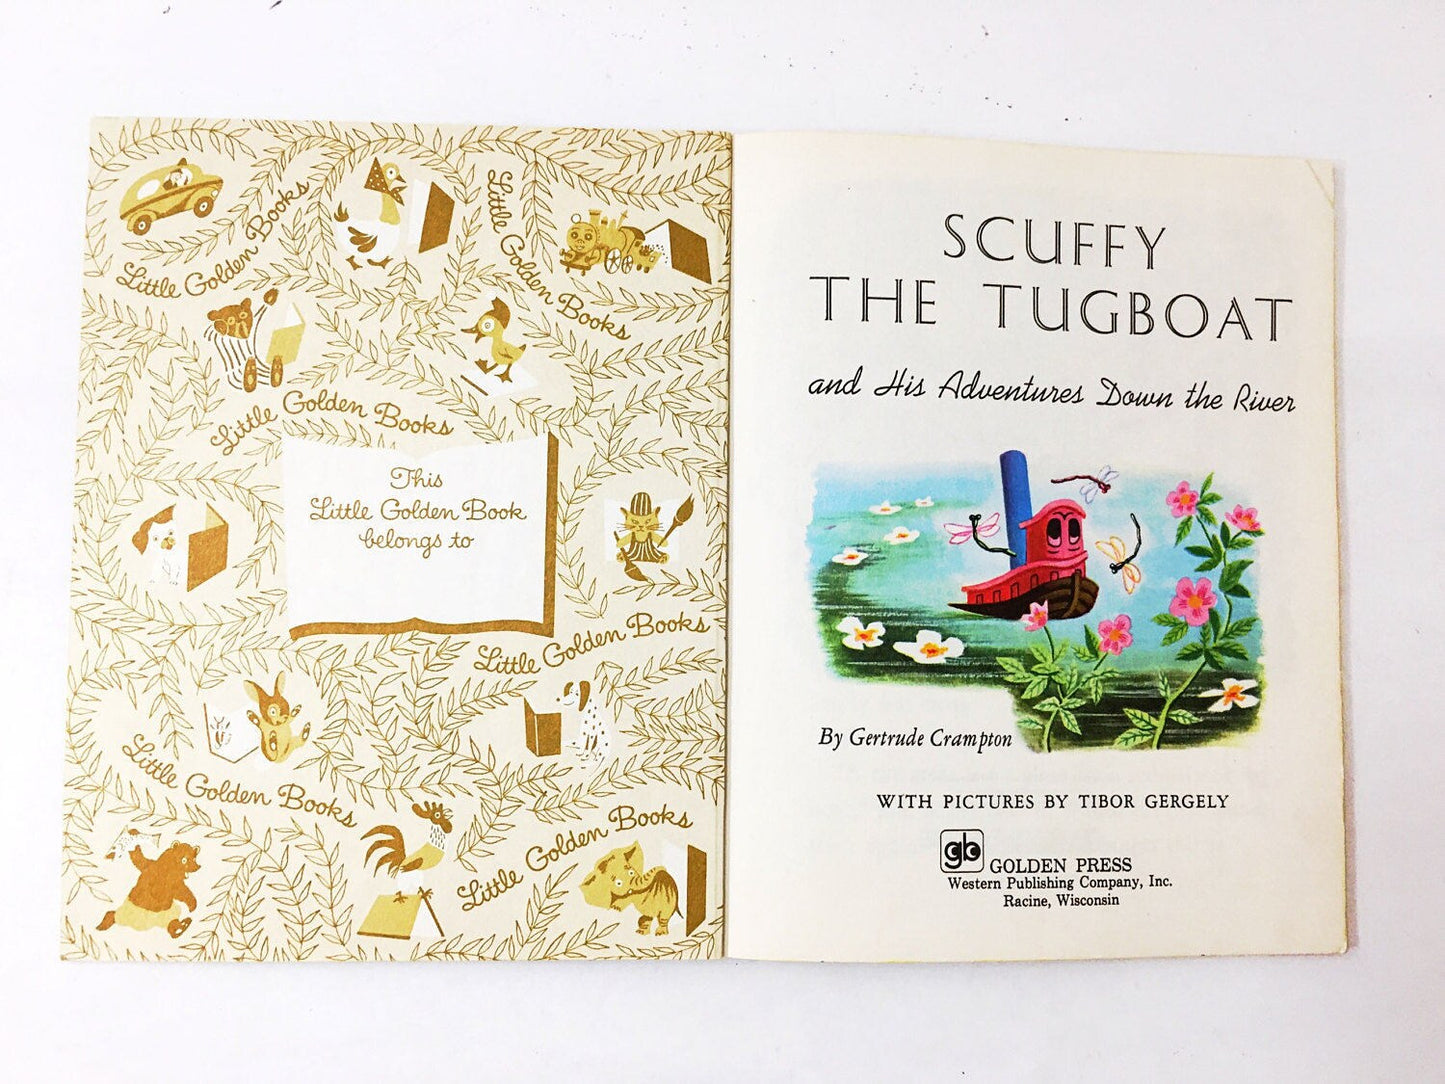 Scuffy the Tugboat vntage Little Golden Book circa 1977 Adventures down the River Children's stocking stuffer elementary reading.